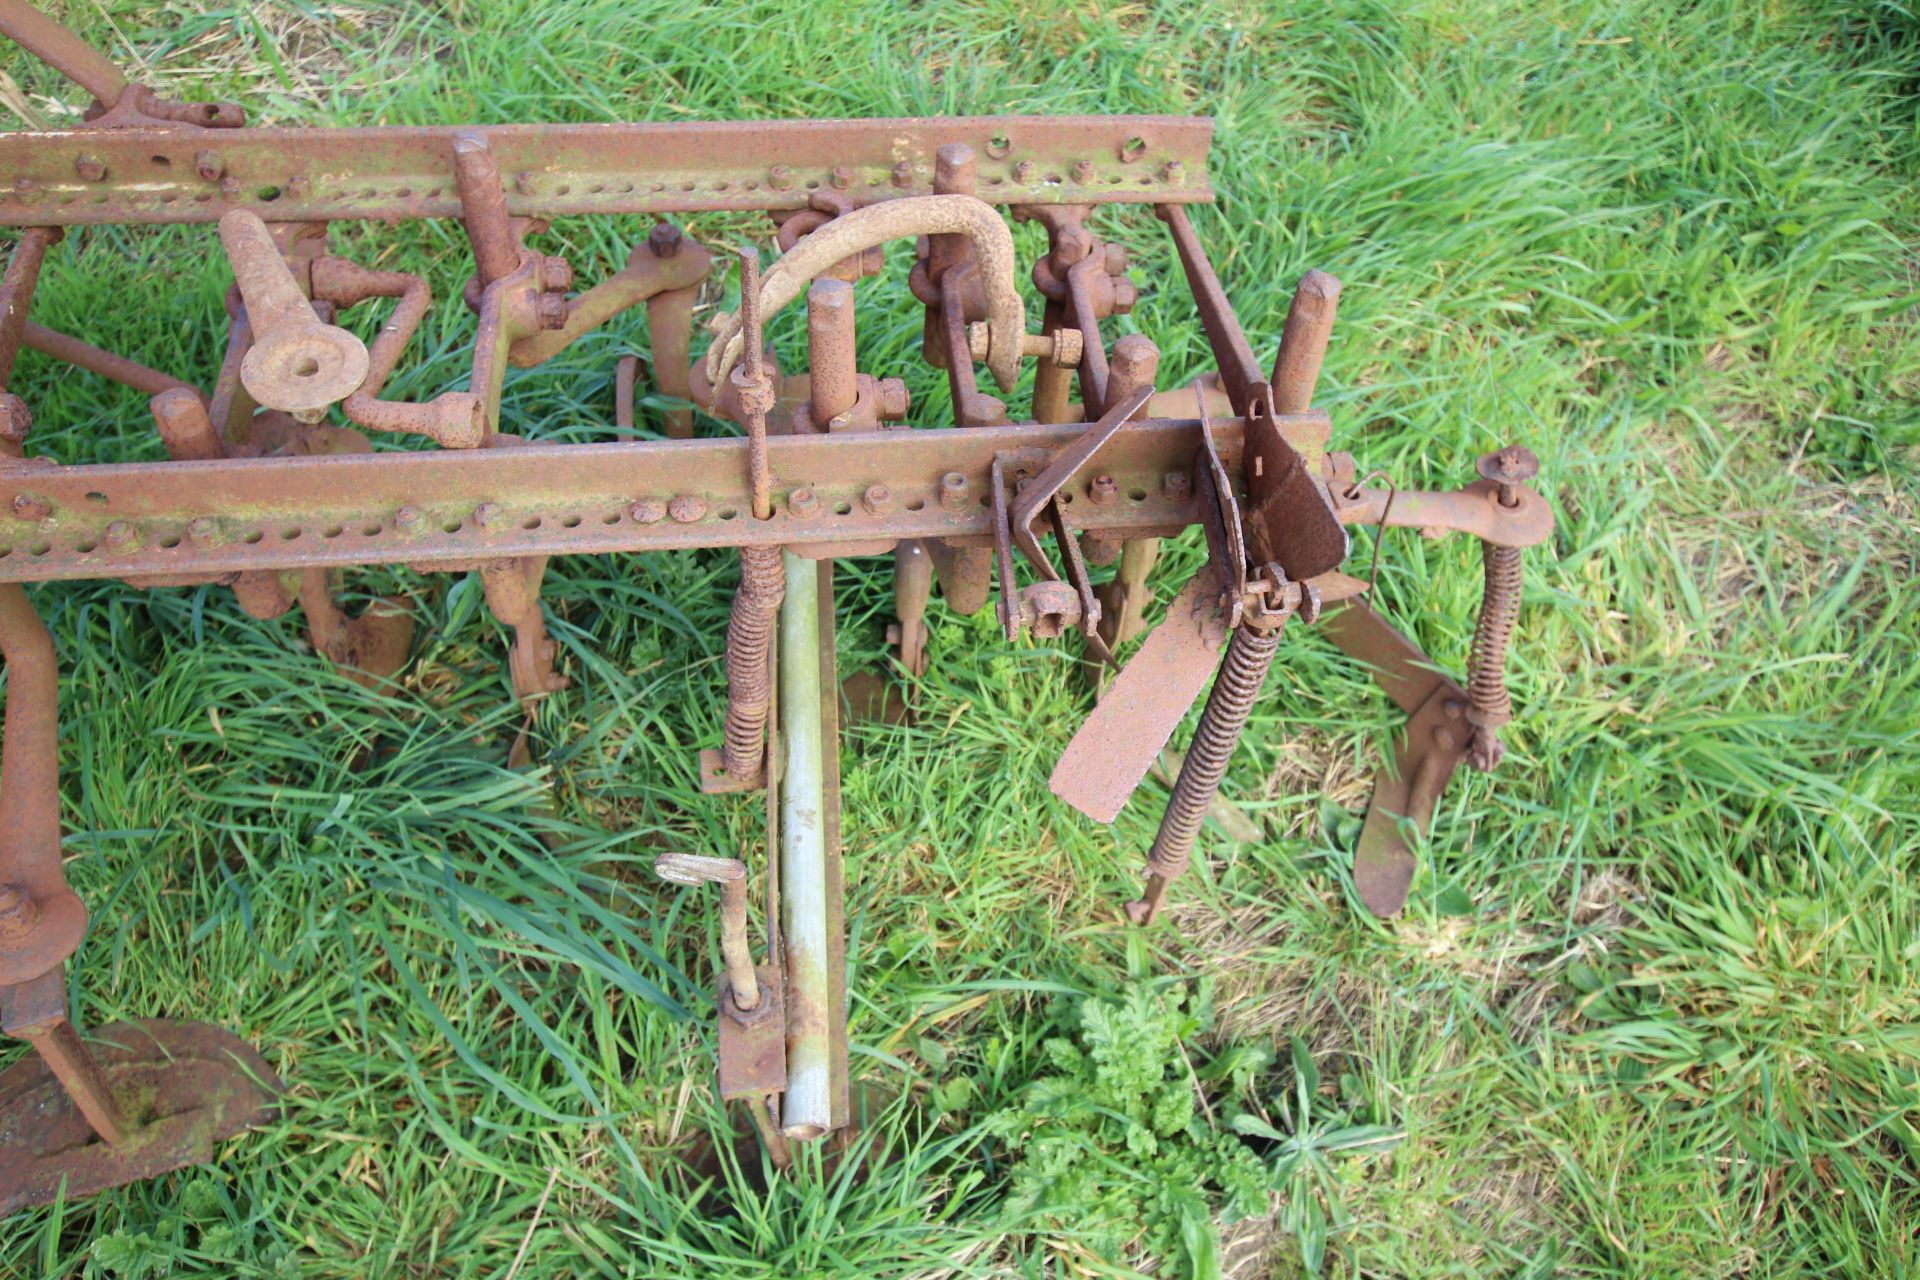 Ferguson BKE-20 extended steerage hoe. Serial number 3215. Owned from new. - Image 11 of 12